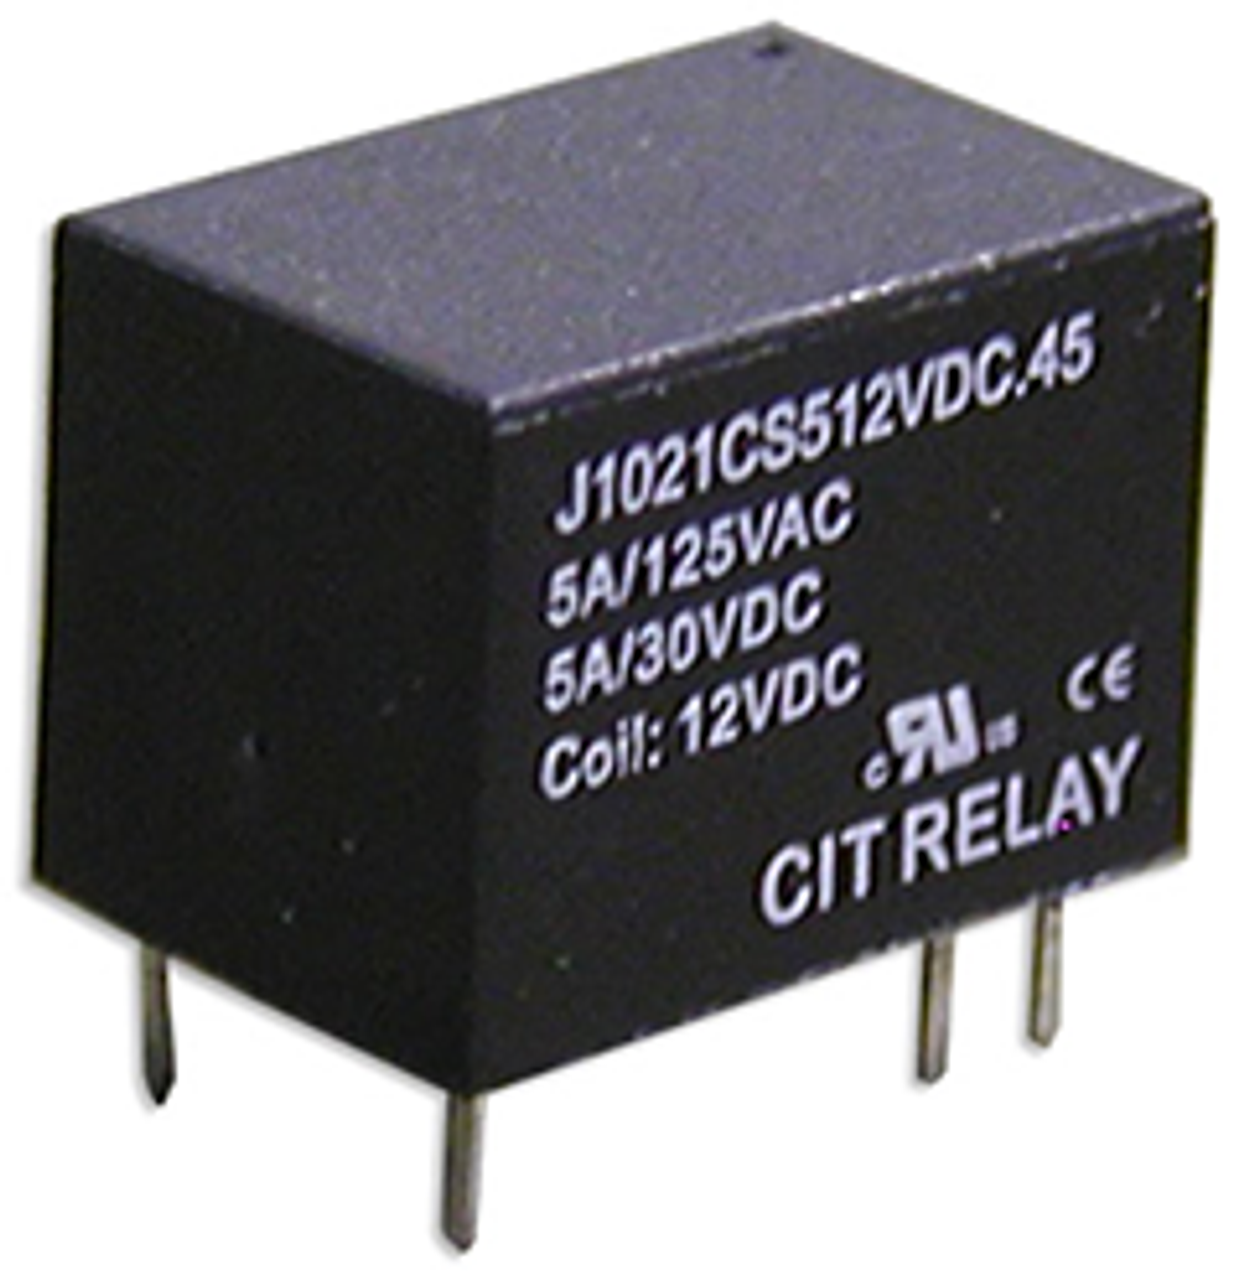 CIT Relay and Switch J1021BS3P24VDC.36 Power Relays